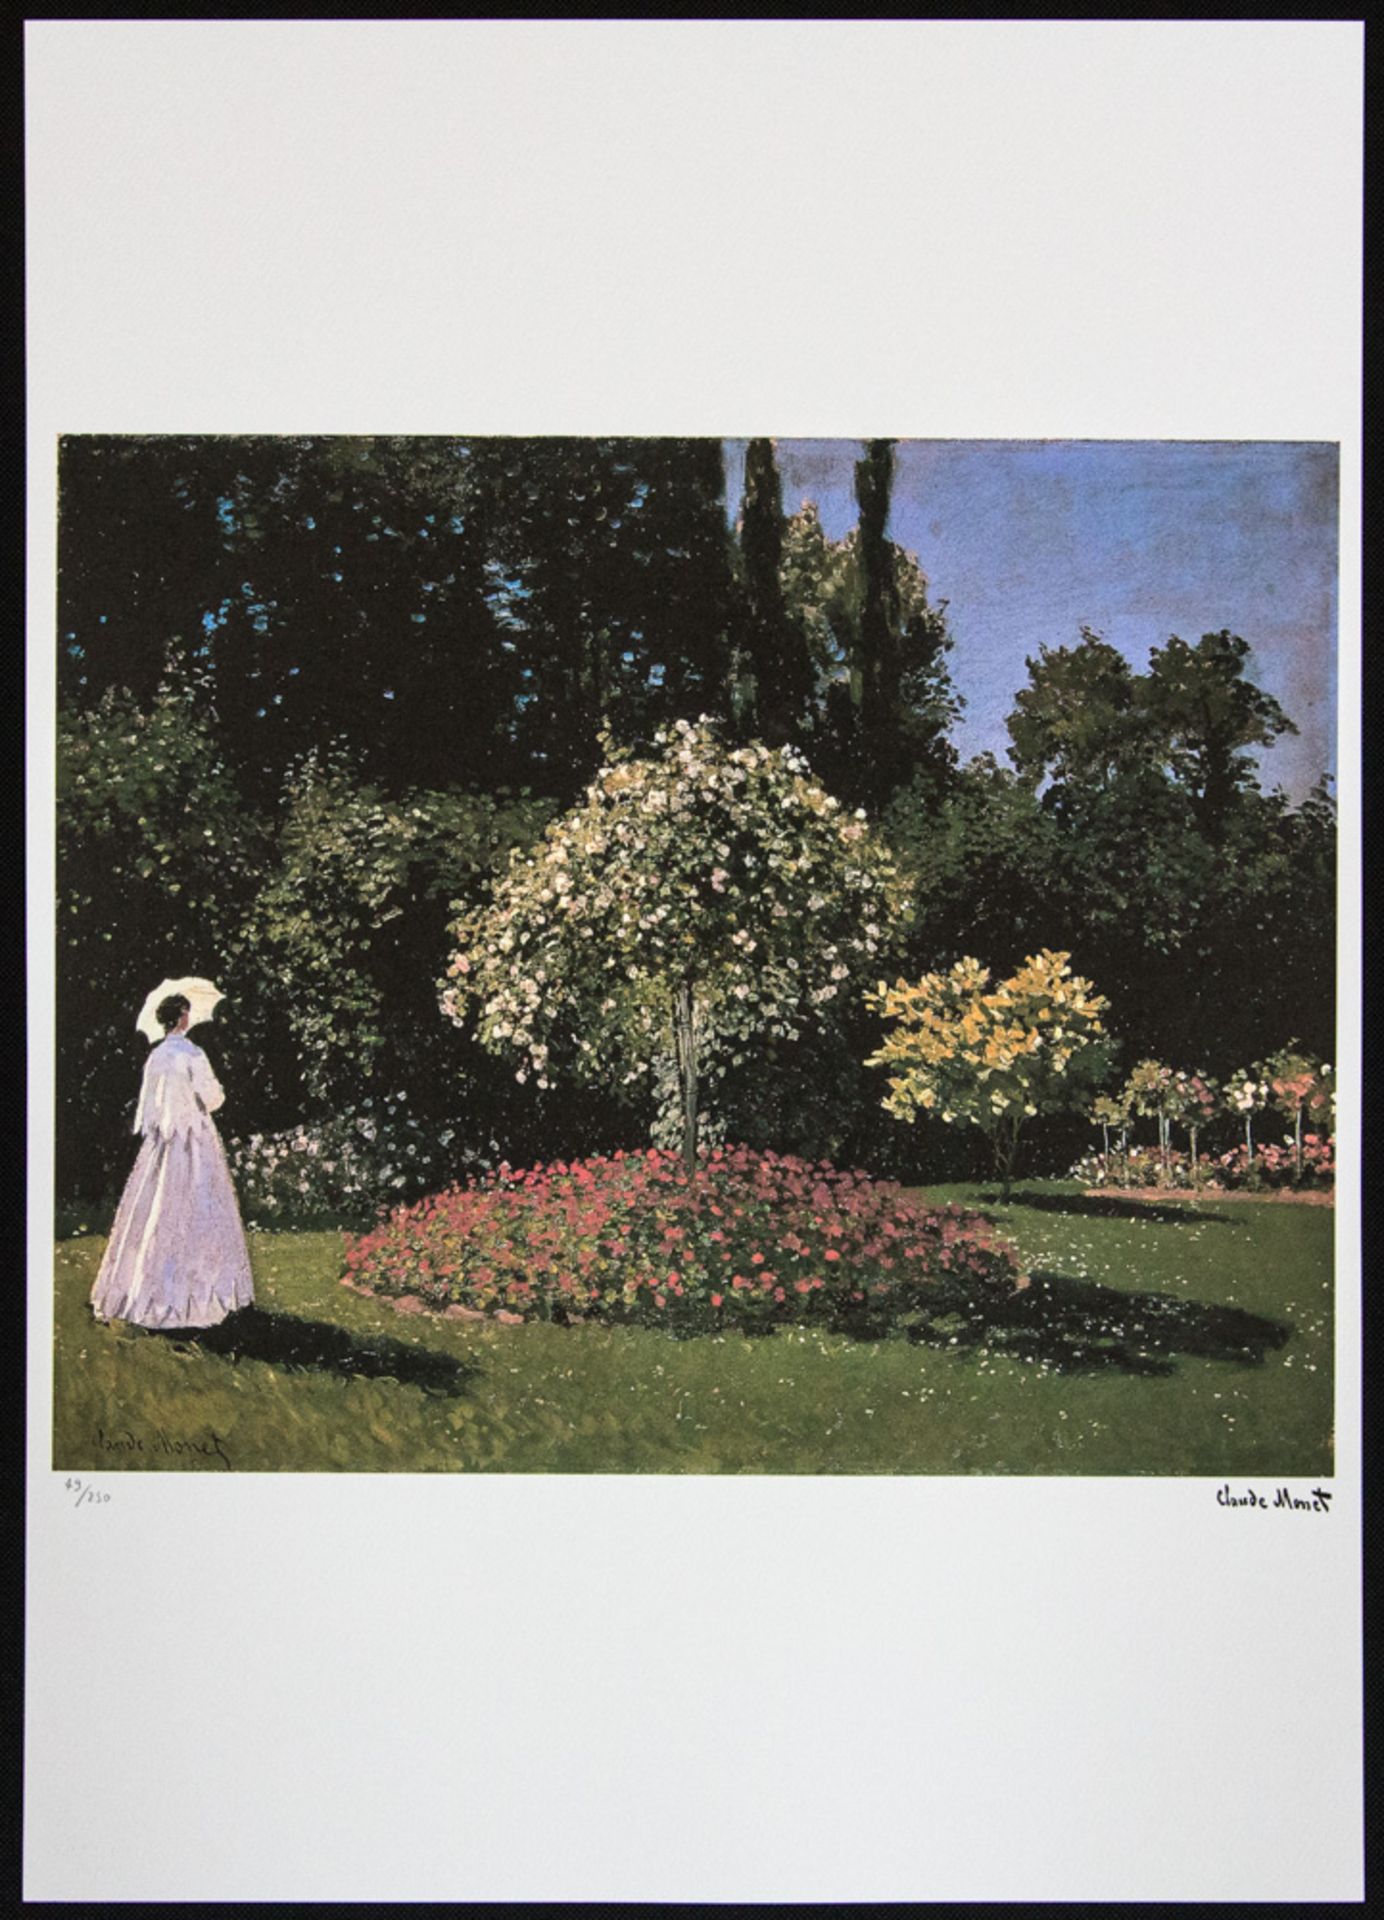 Claude Monet 'Lady In a Garden' - Image 2 of 5